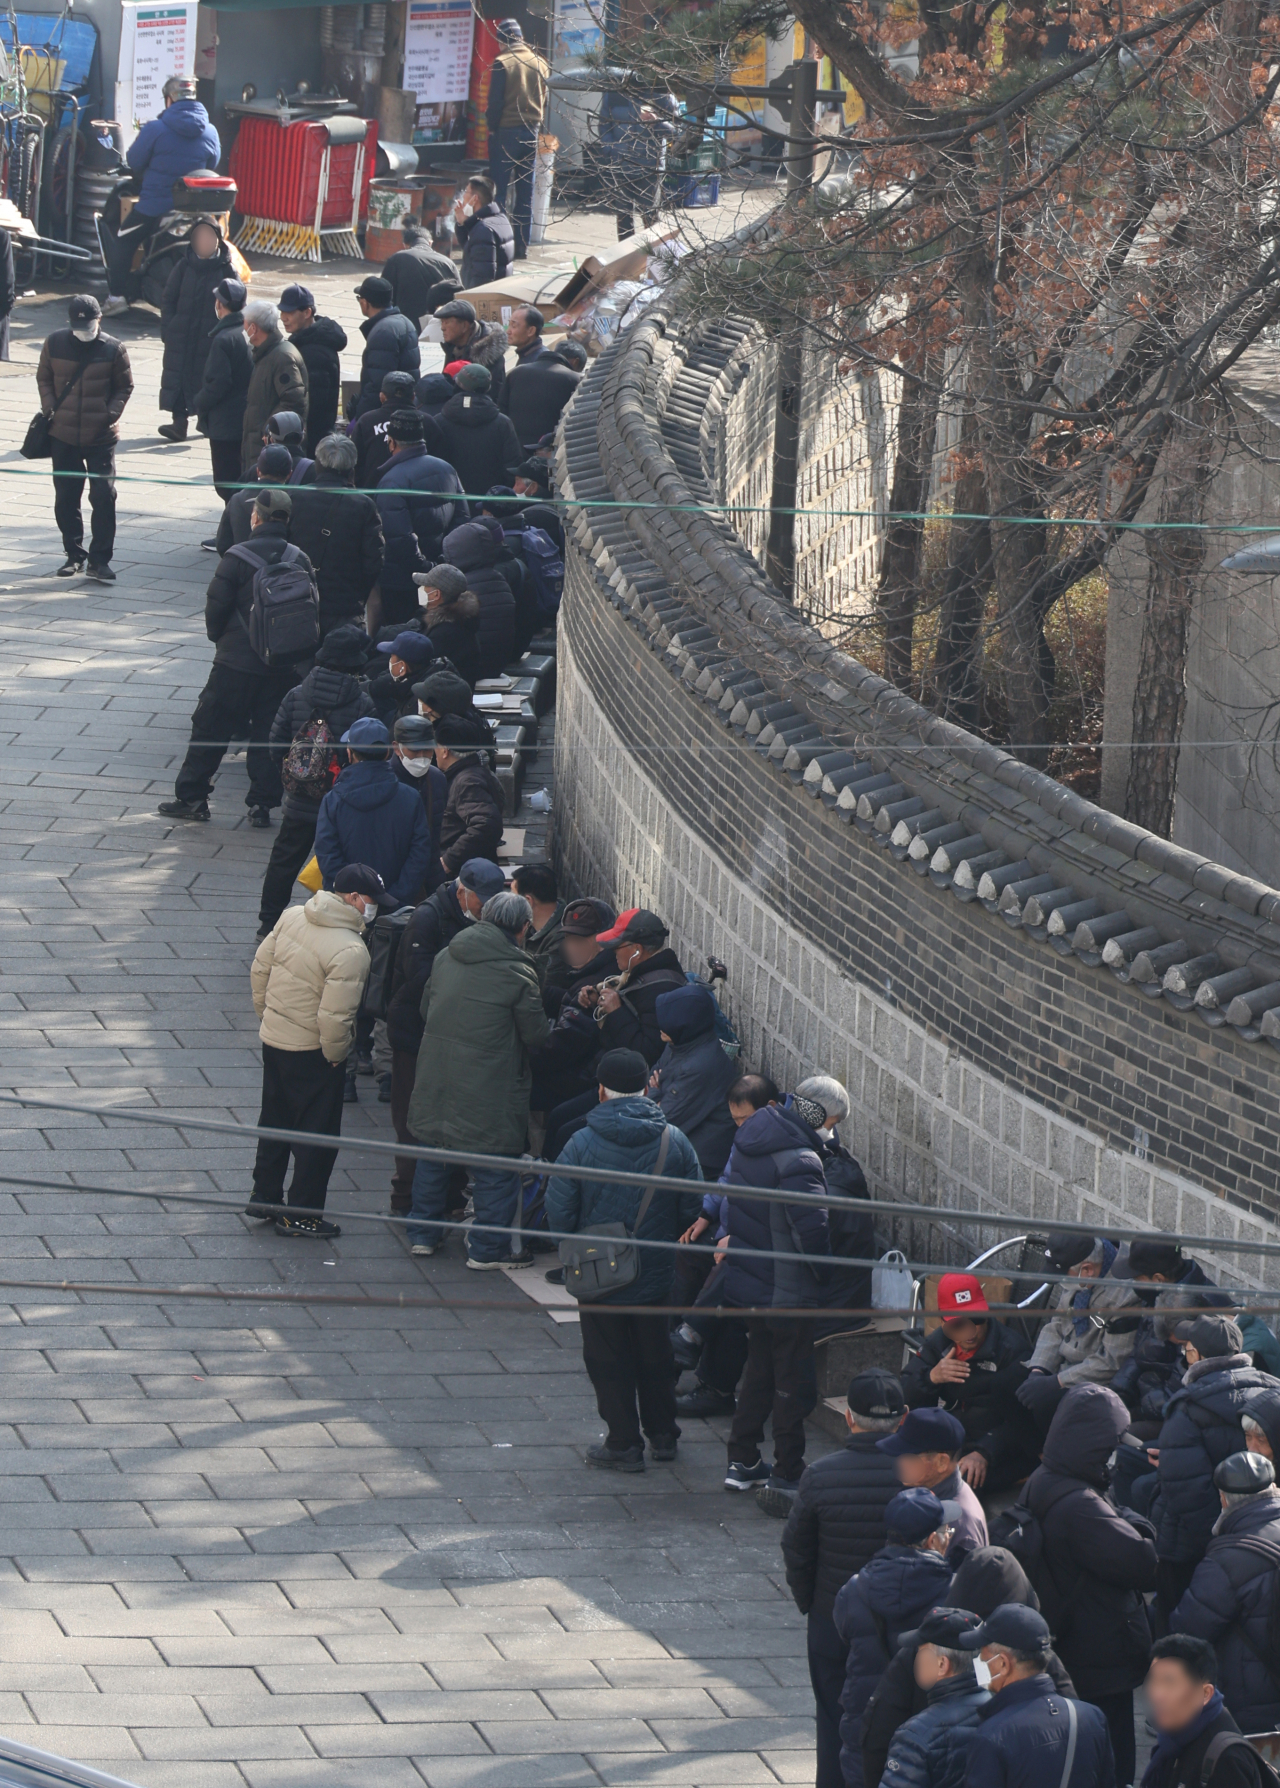 People are waiting in line at a soup kitchen in Jongno-gu, central Seoul in this Feb.12 file photo. (Yonhap)